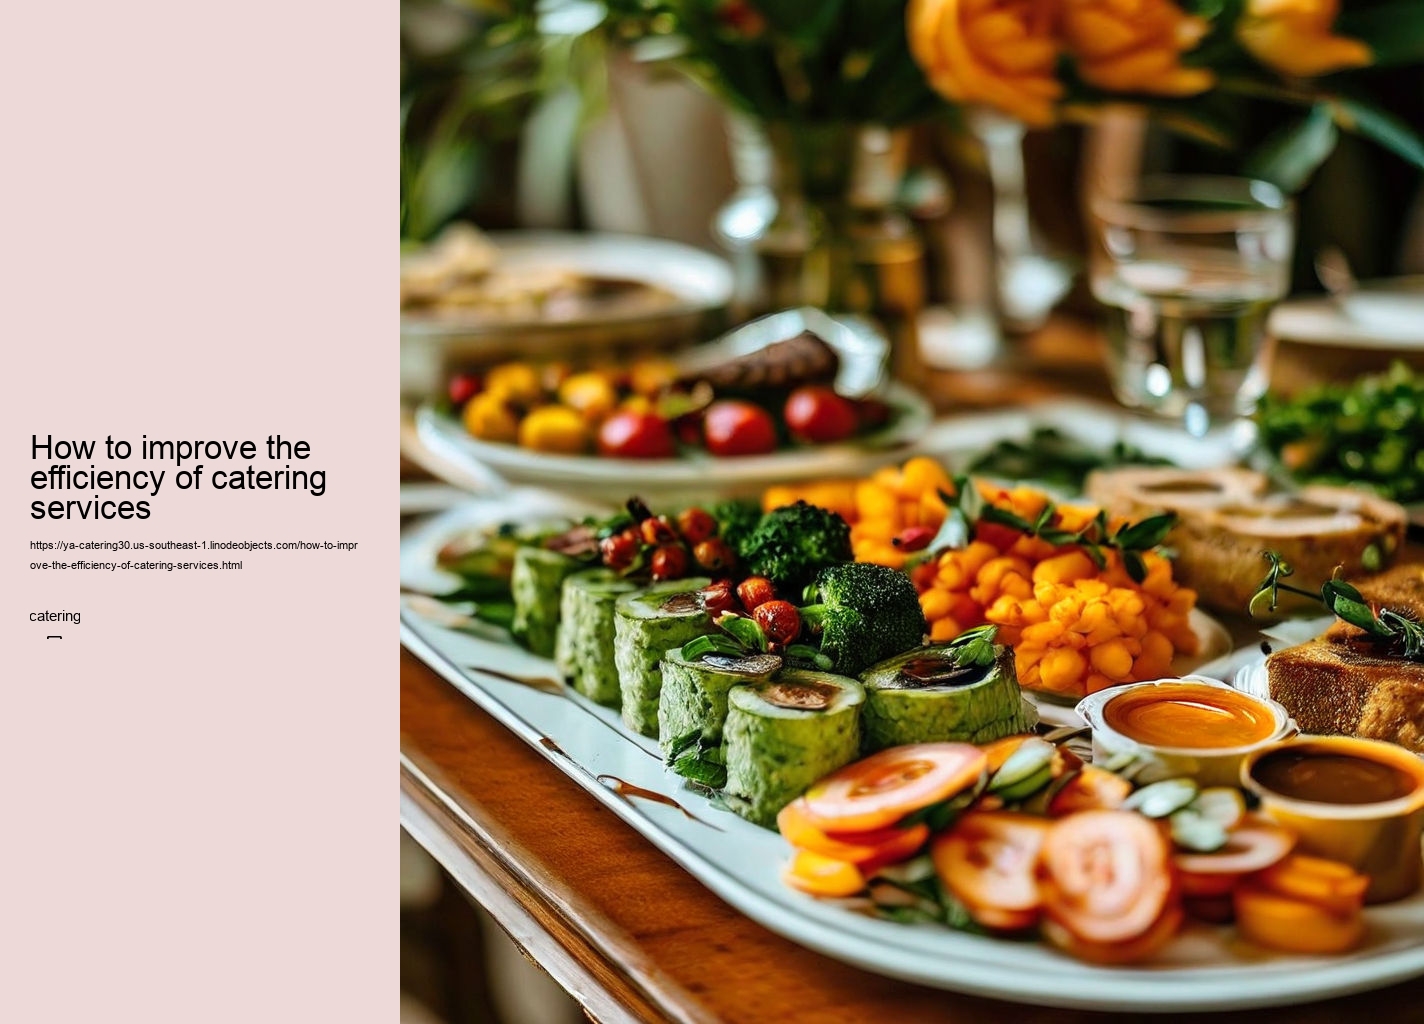 How to improve the efficiency of catering services